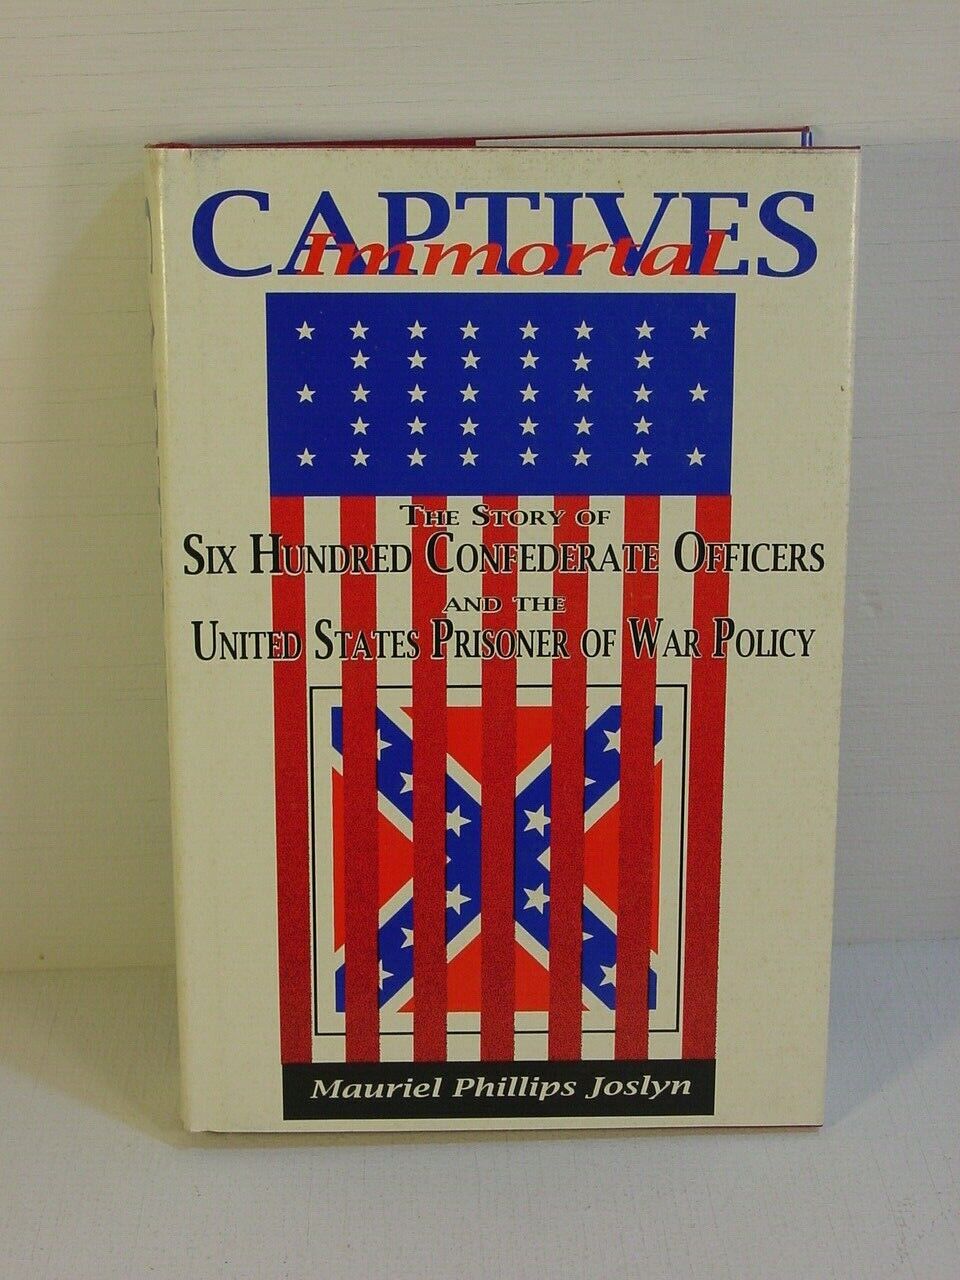 Immortal Captives : 600 Confederate Officers and US PoW Policy by Joslyn : HC/DJ